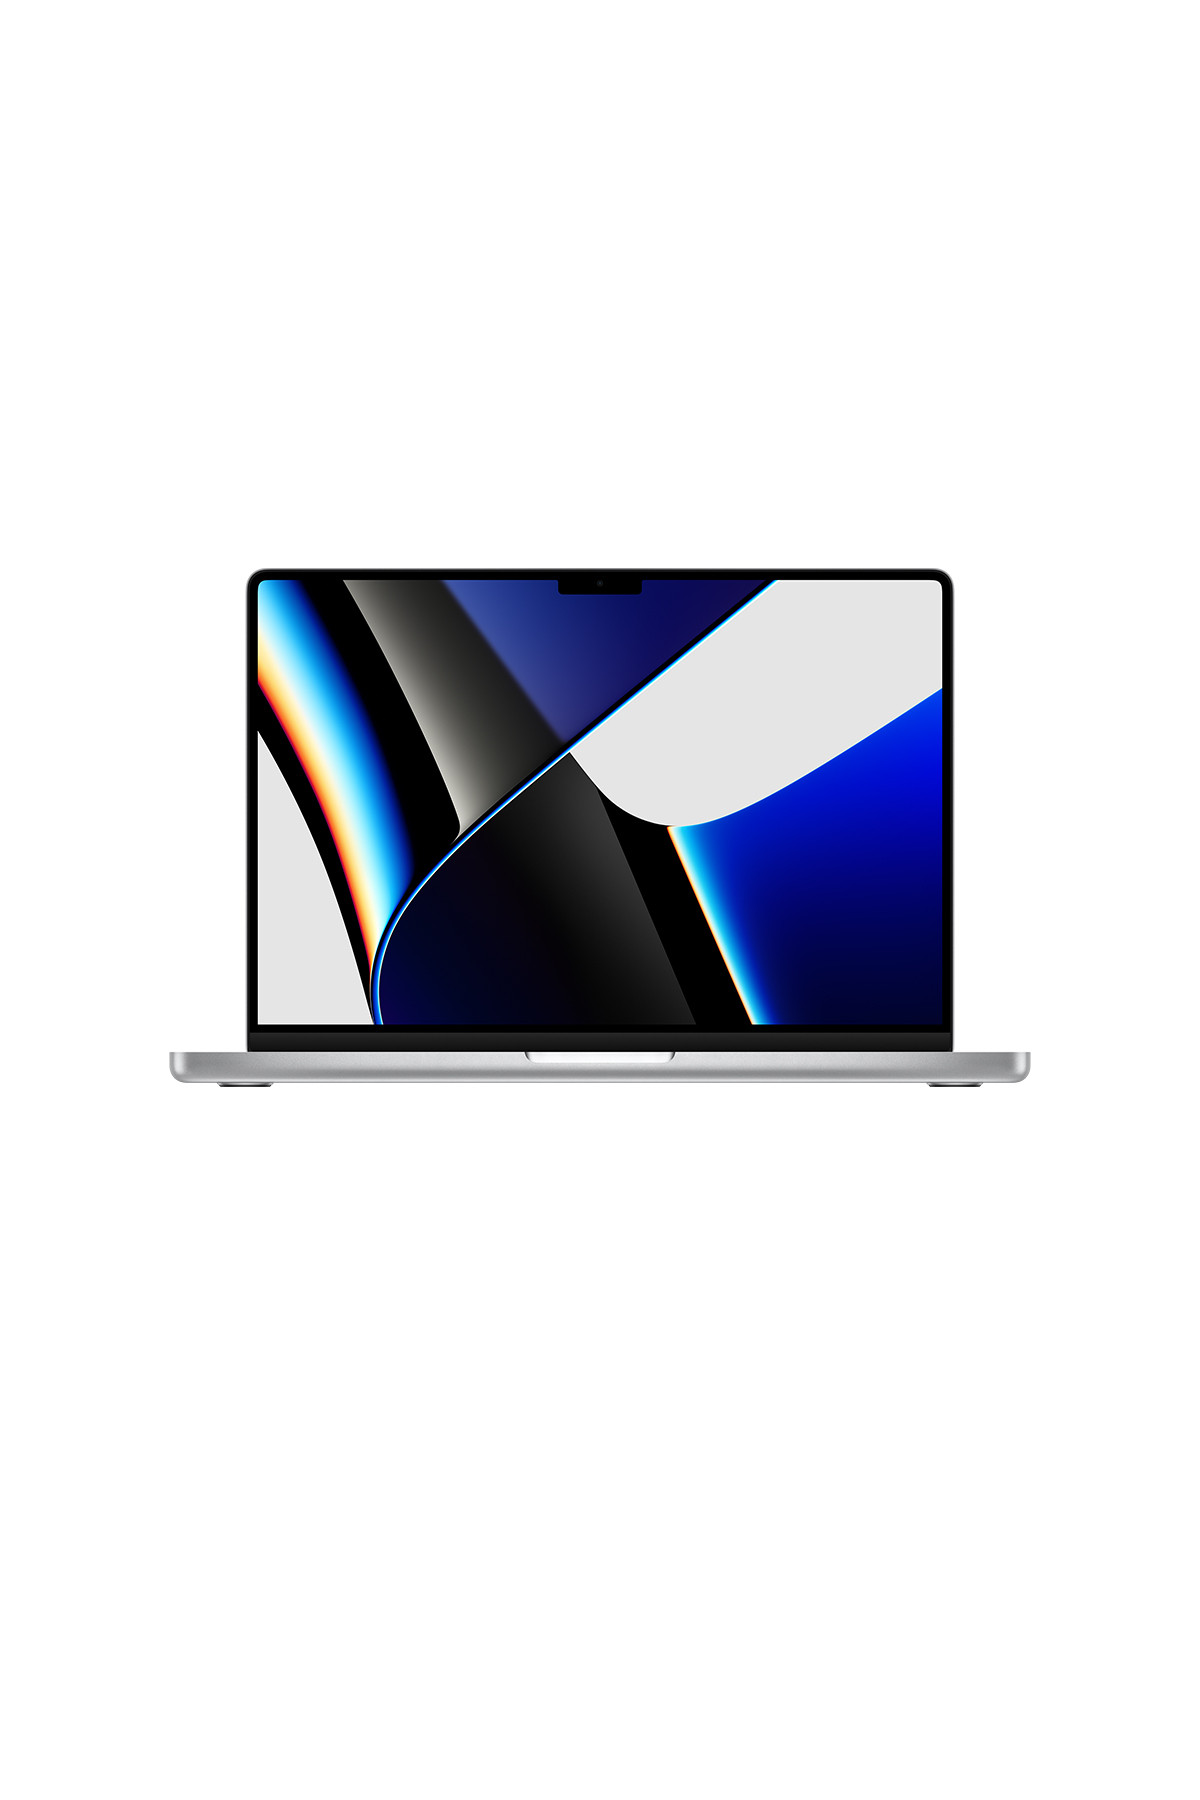 MacBook Pro 14-inch Silver
8-Core CPU
14-Core GPU
16GB Unified Memory
512GB SSD Storage¹ 
16-core Neural Engine
14-inch Liquid Retina XDR display
Three Thunderbolt 4 ports, HDMI port, SDXC card slot and MagSafe 3 port
Magic Keyboard with Touch ID